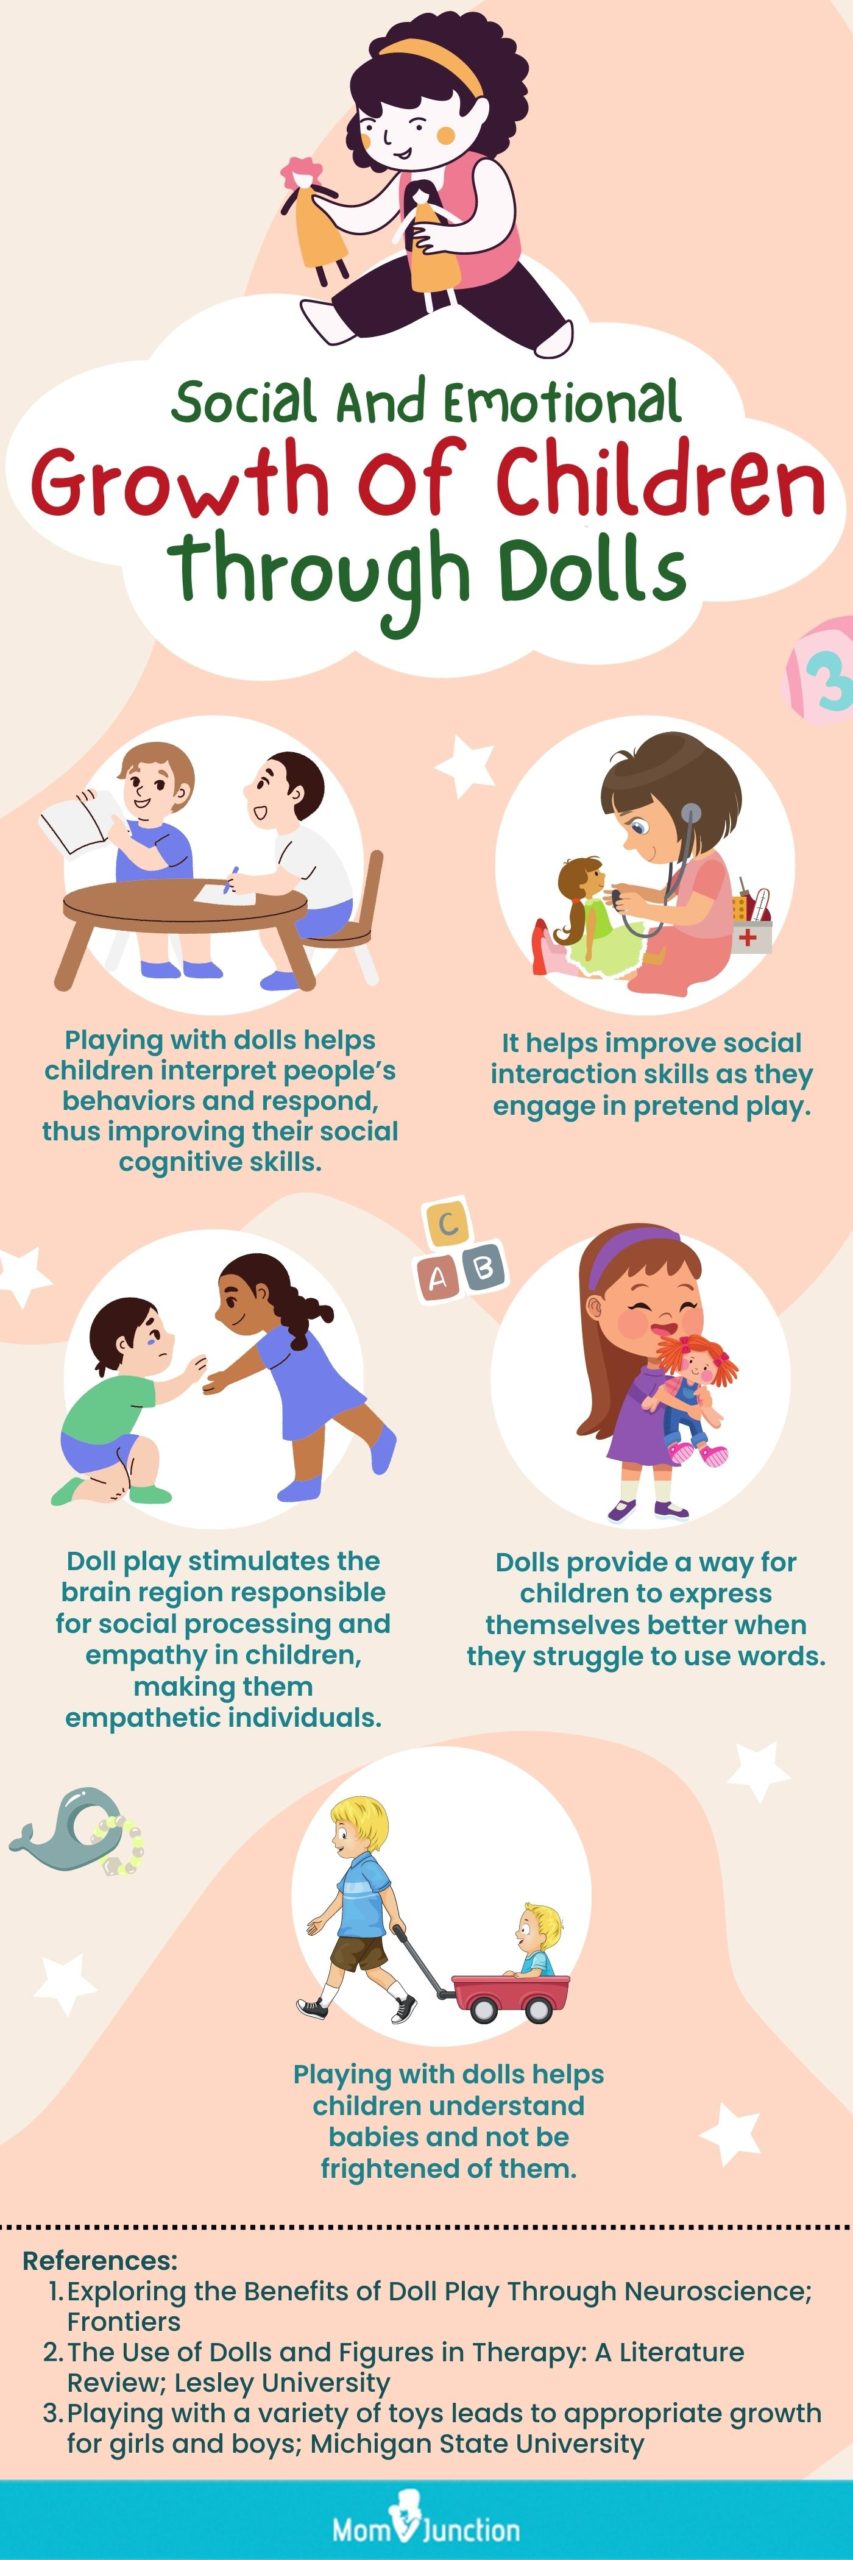 Social And Emotional Growth Of Children Through Dolls